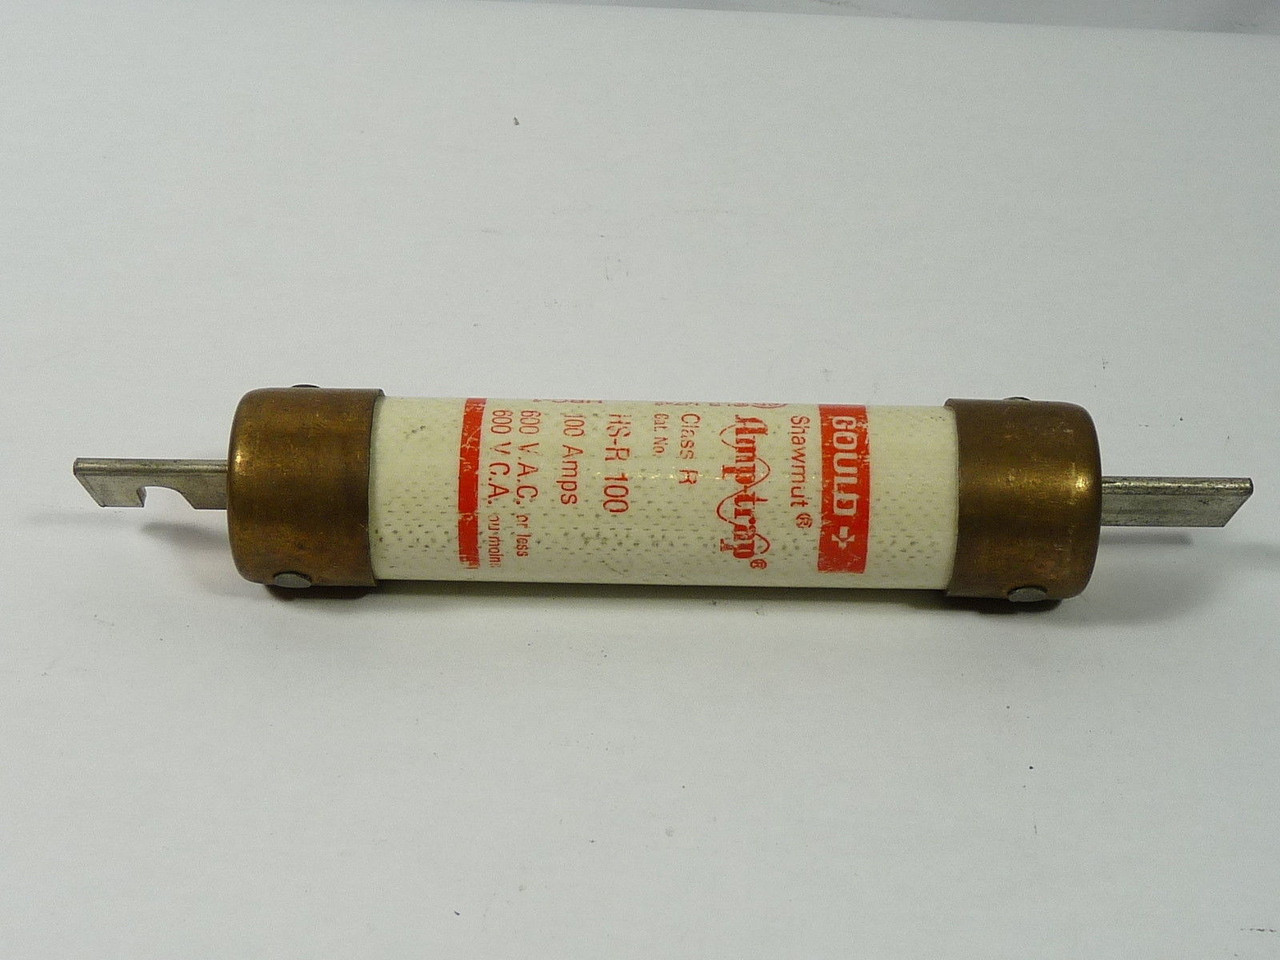 Amp-Trap HS-R100 Dual Element Fuse 100A 600V USED